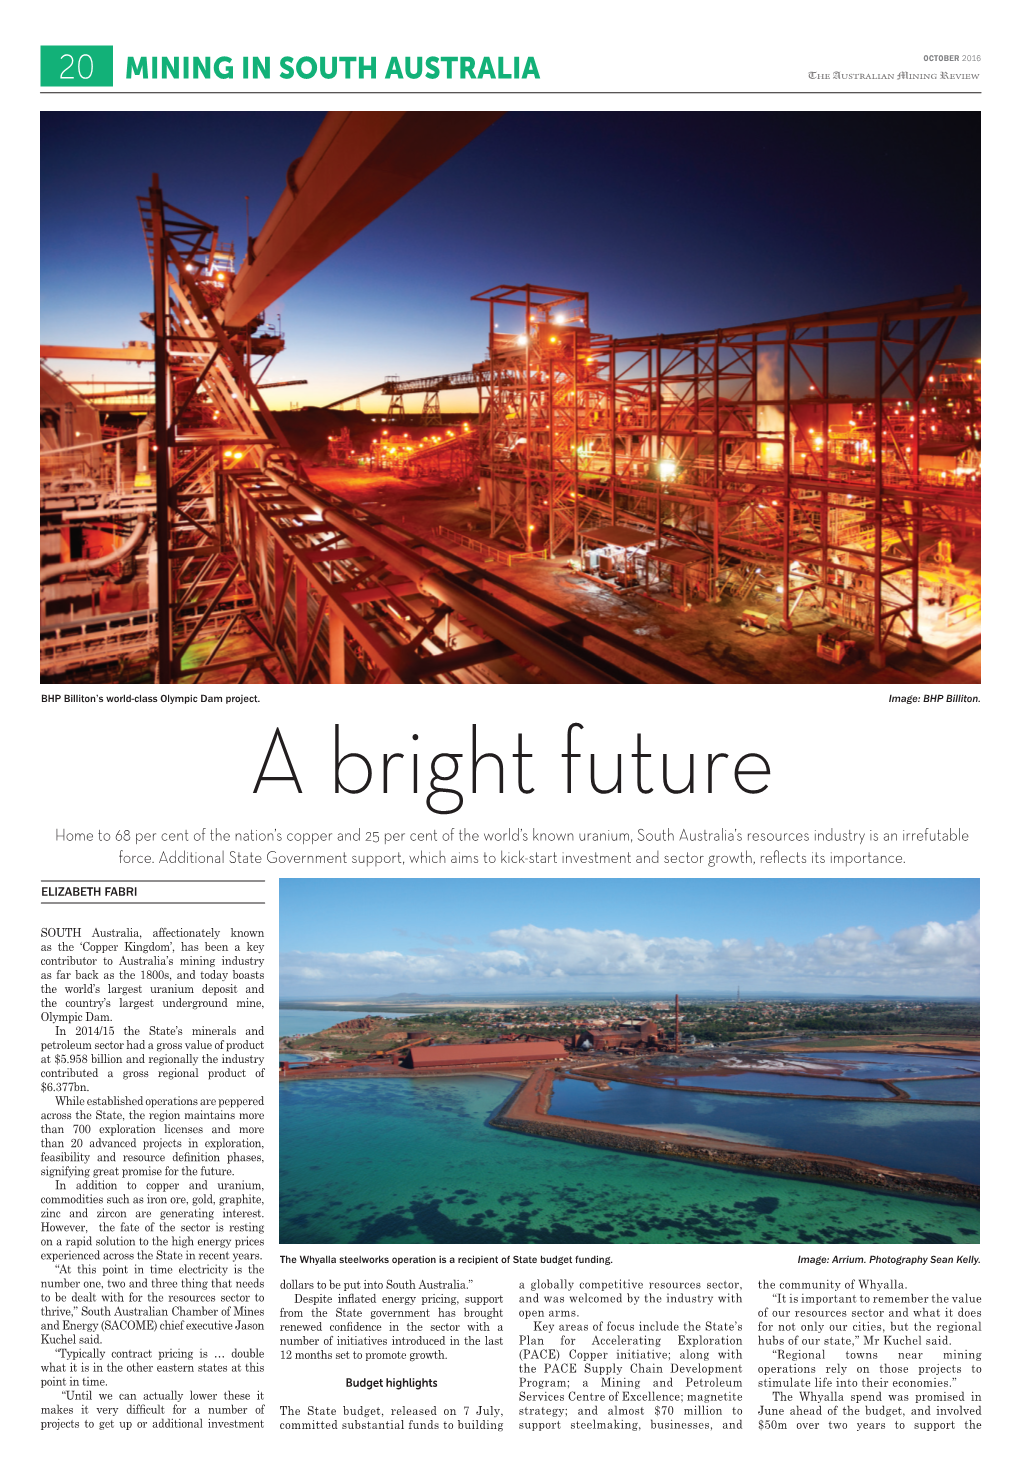 Mining in South Australia the AUSTLIAN MINING REVIEW